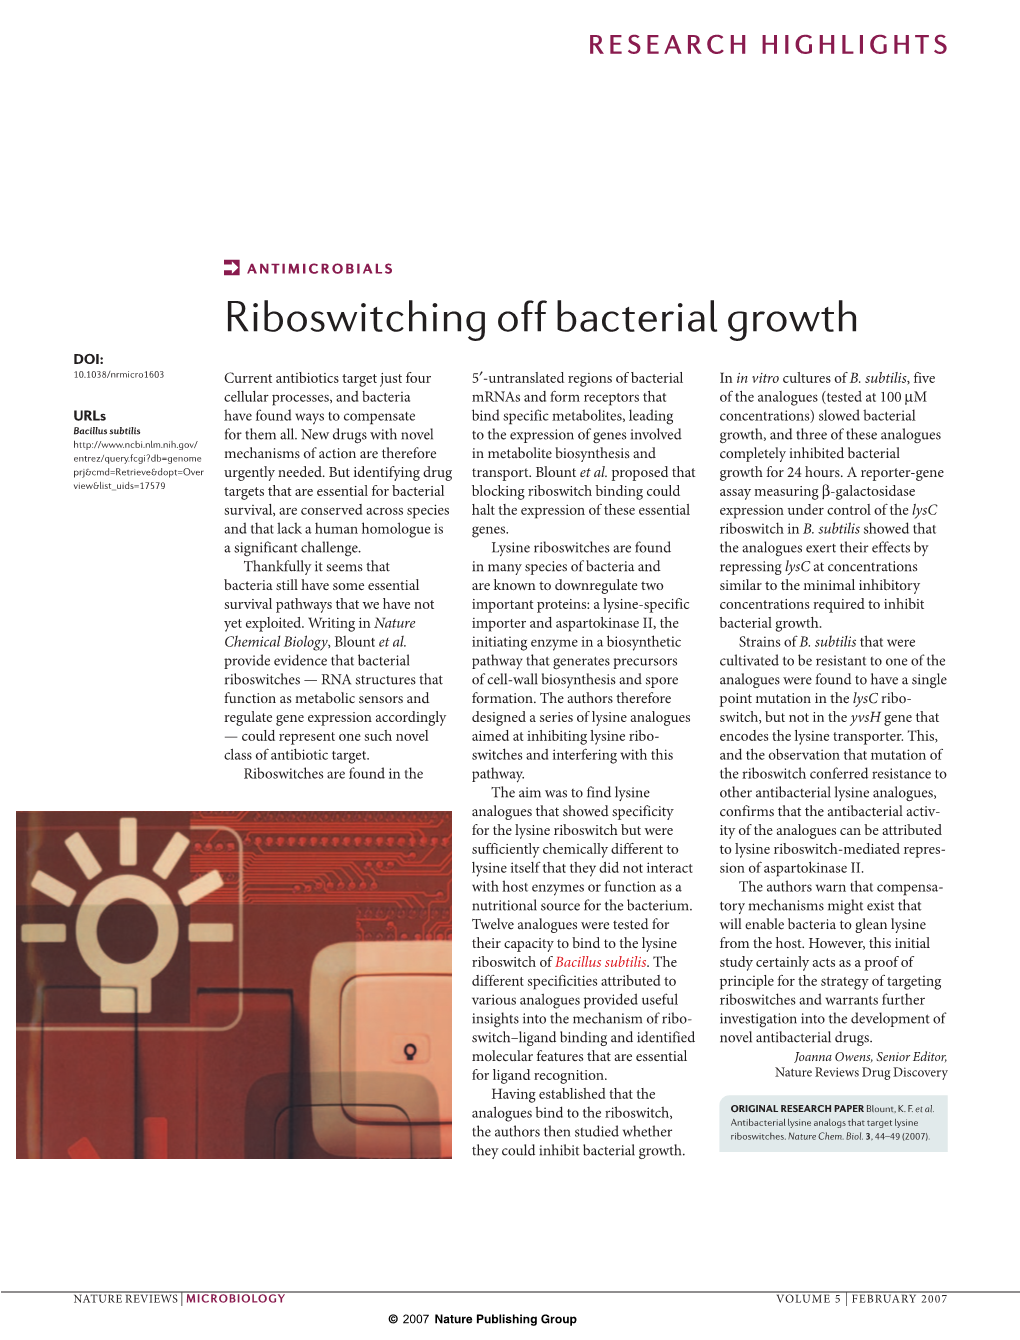 Riboswitching Off Bacterial Growth DOI: 10.1038/Nrmicro1603 Current Antibiotics Target Just Four 5′-Untranslated Regions of Bacterial in in Vitro Cultures of B